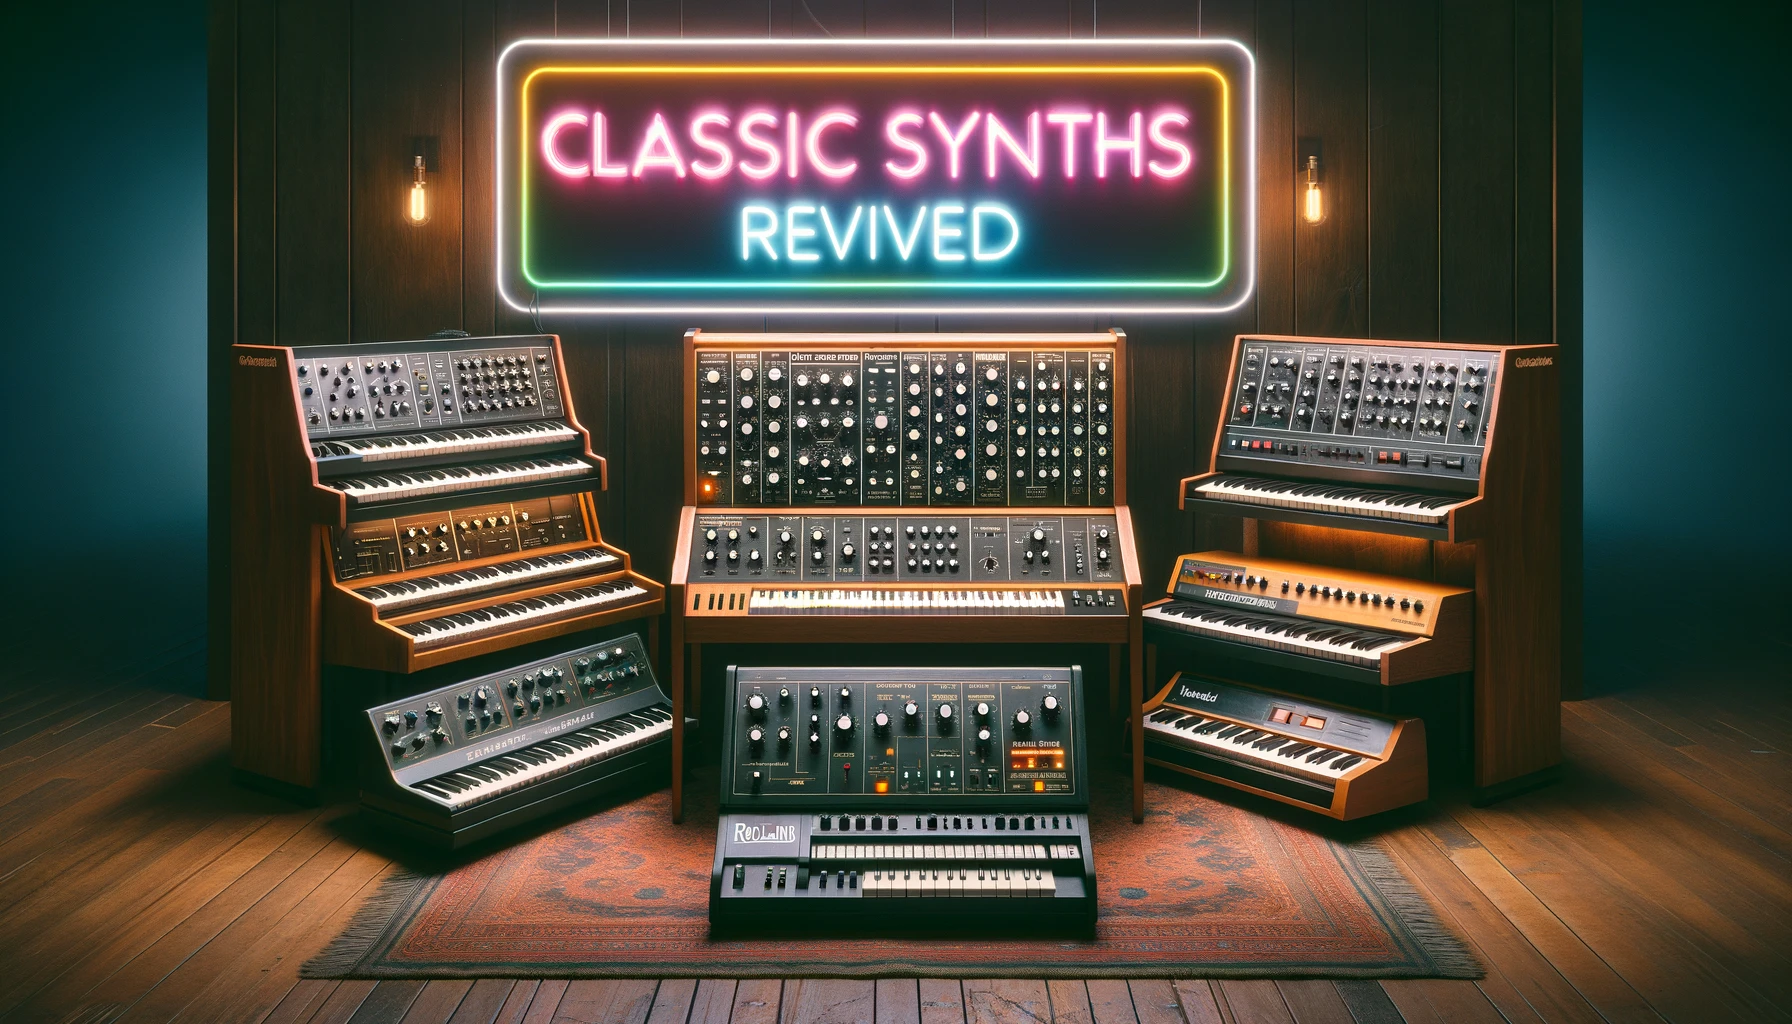 created synth sounds via hardware emulation